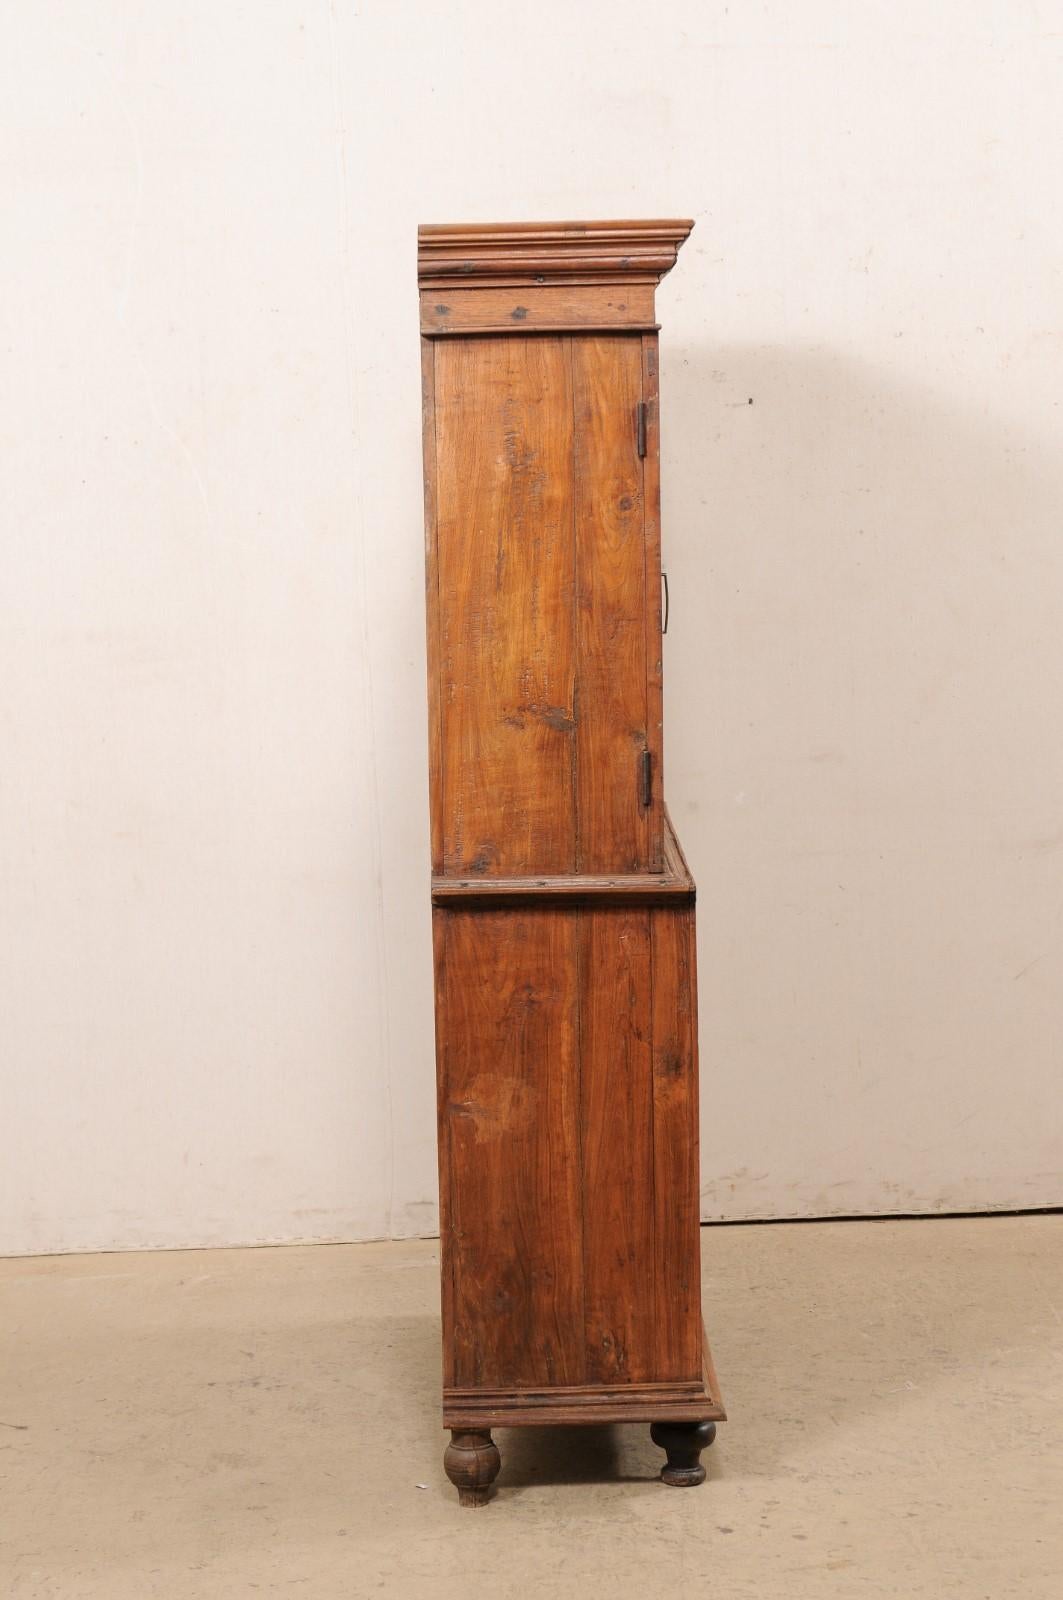 Indian Tall British Colonial Teak-Carved Cabinet W/ Beautifully Carved Doors, 19th C